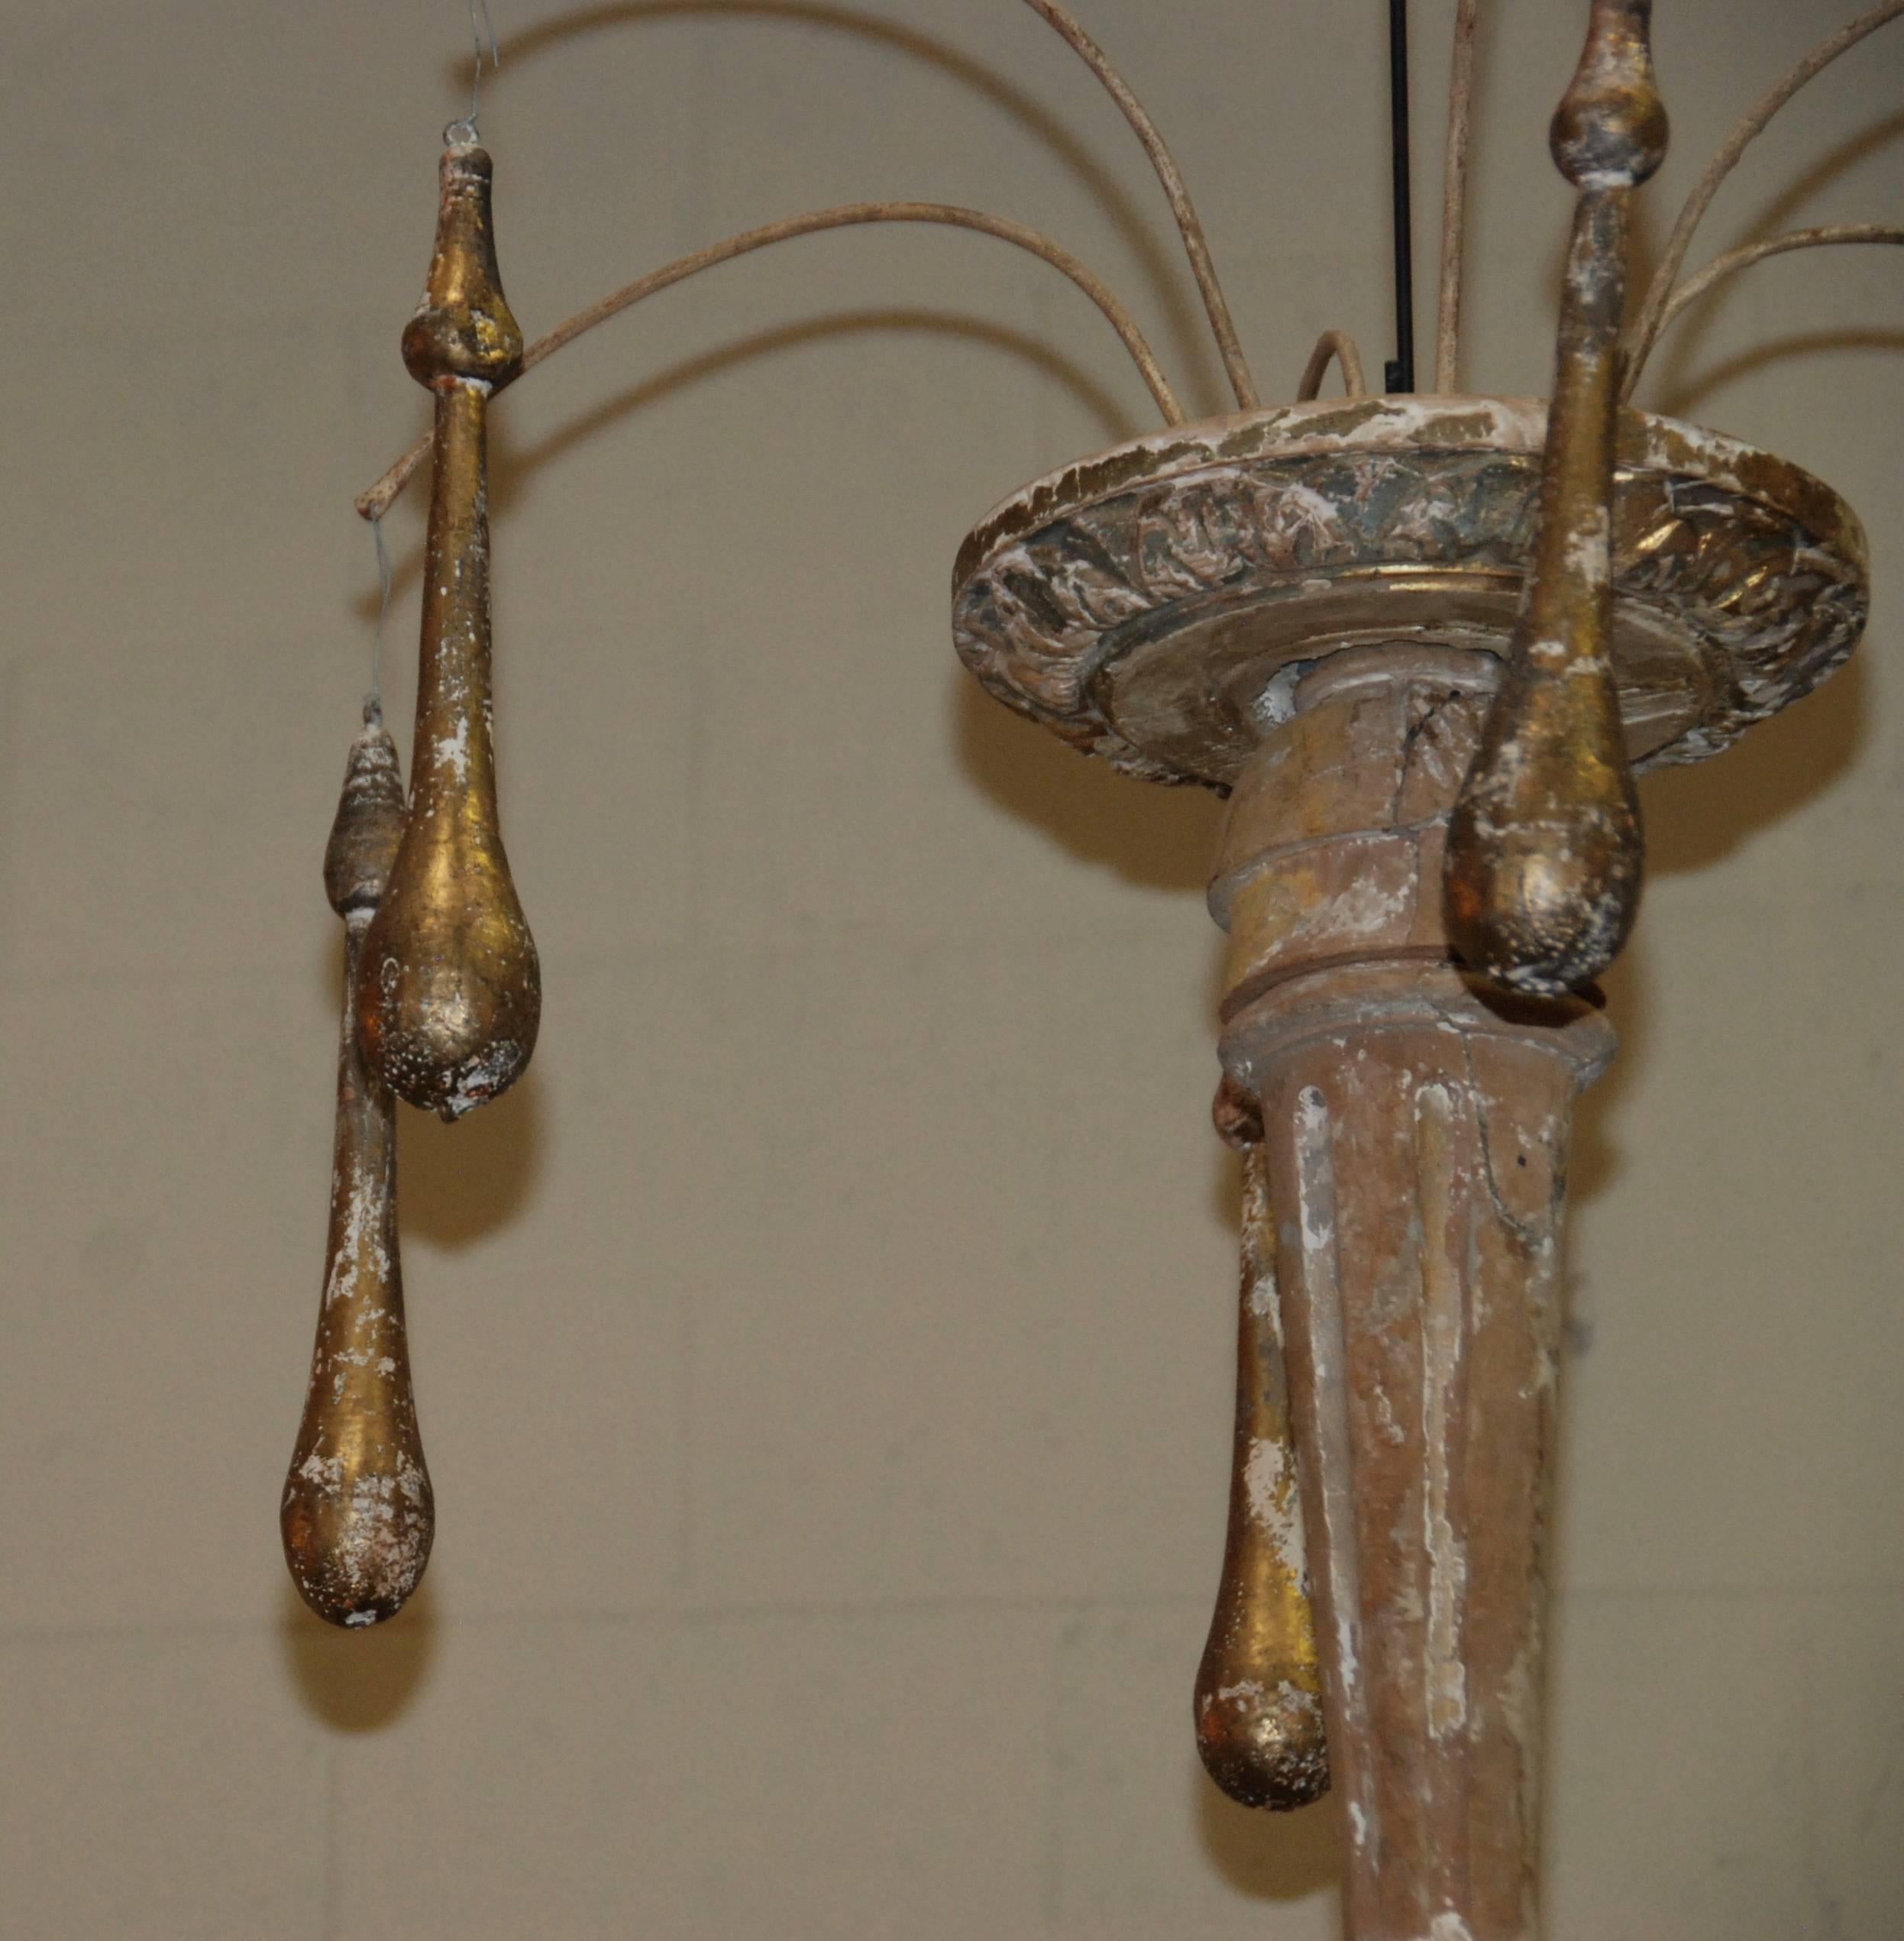 Beautiful large Italian candlestick iron and wood chandelier. Great aged white and gold patina.